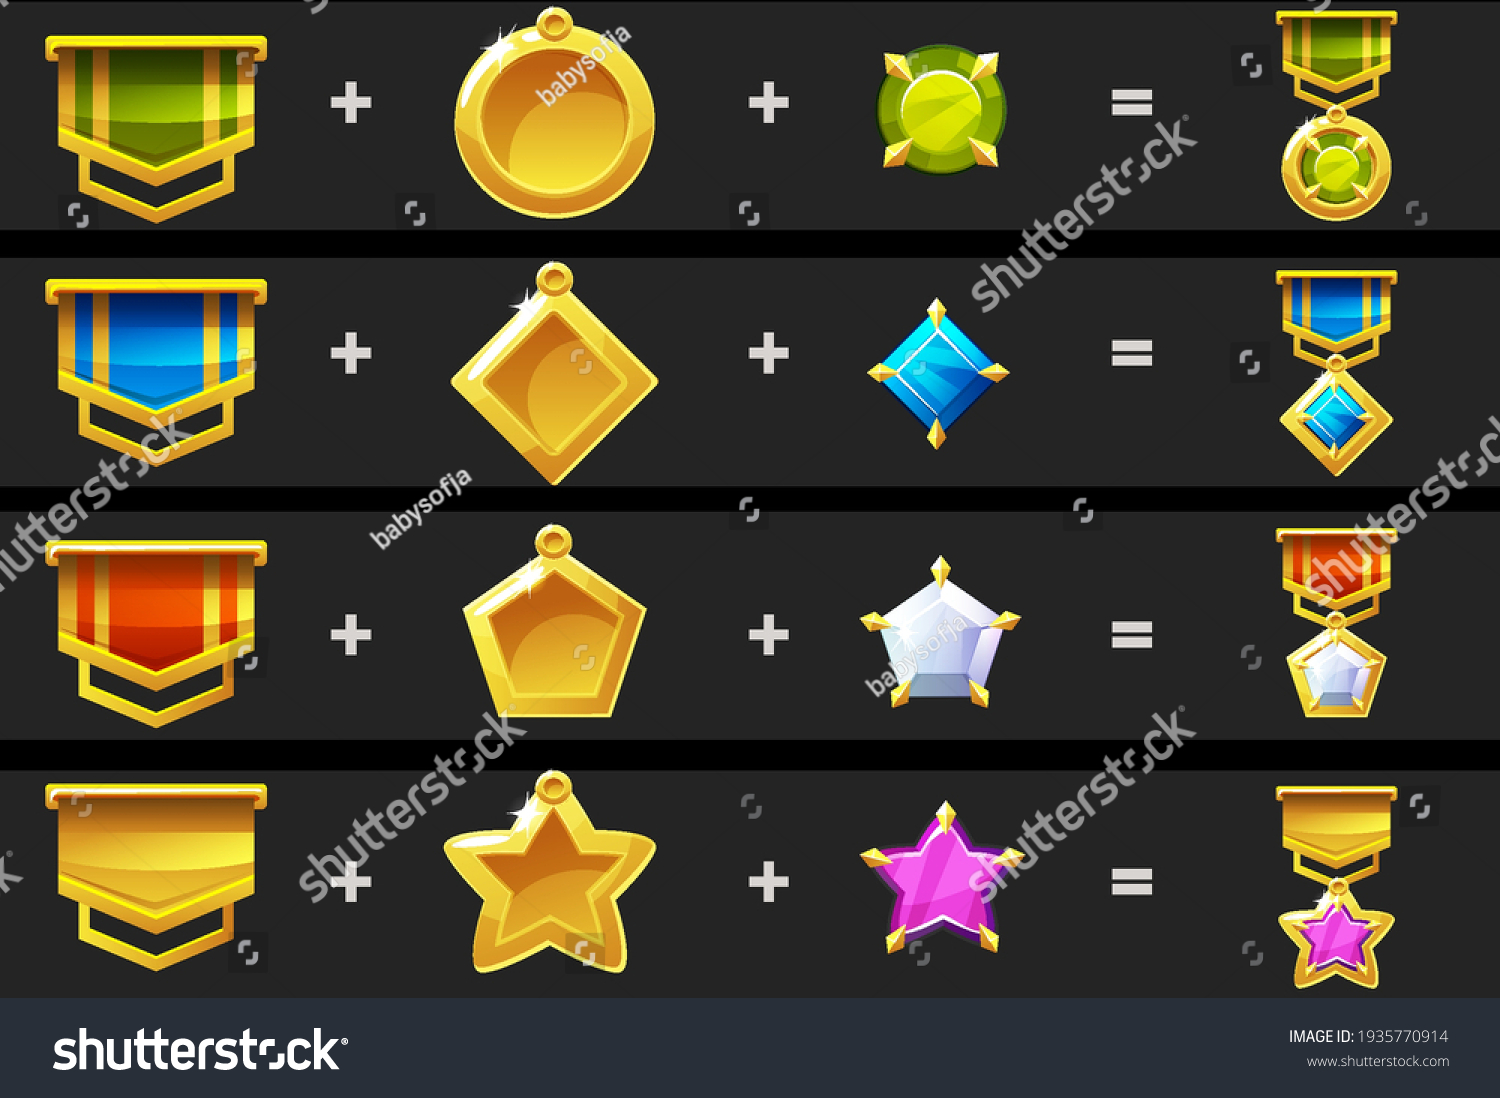 SVG of Constructor with details for medals for the game. svg